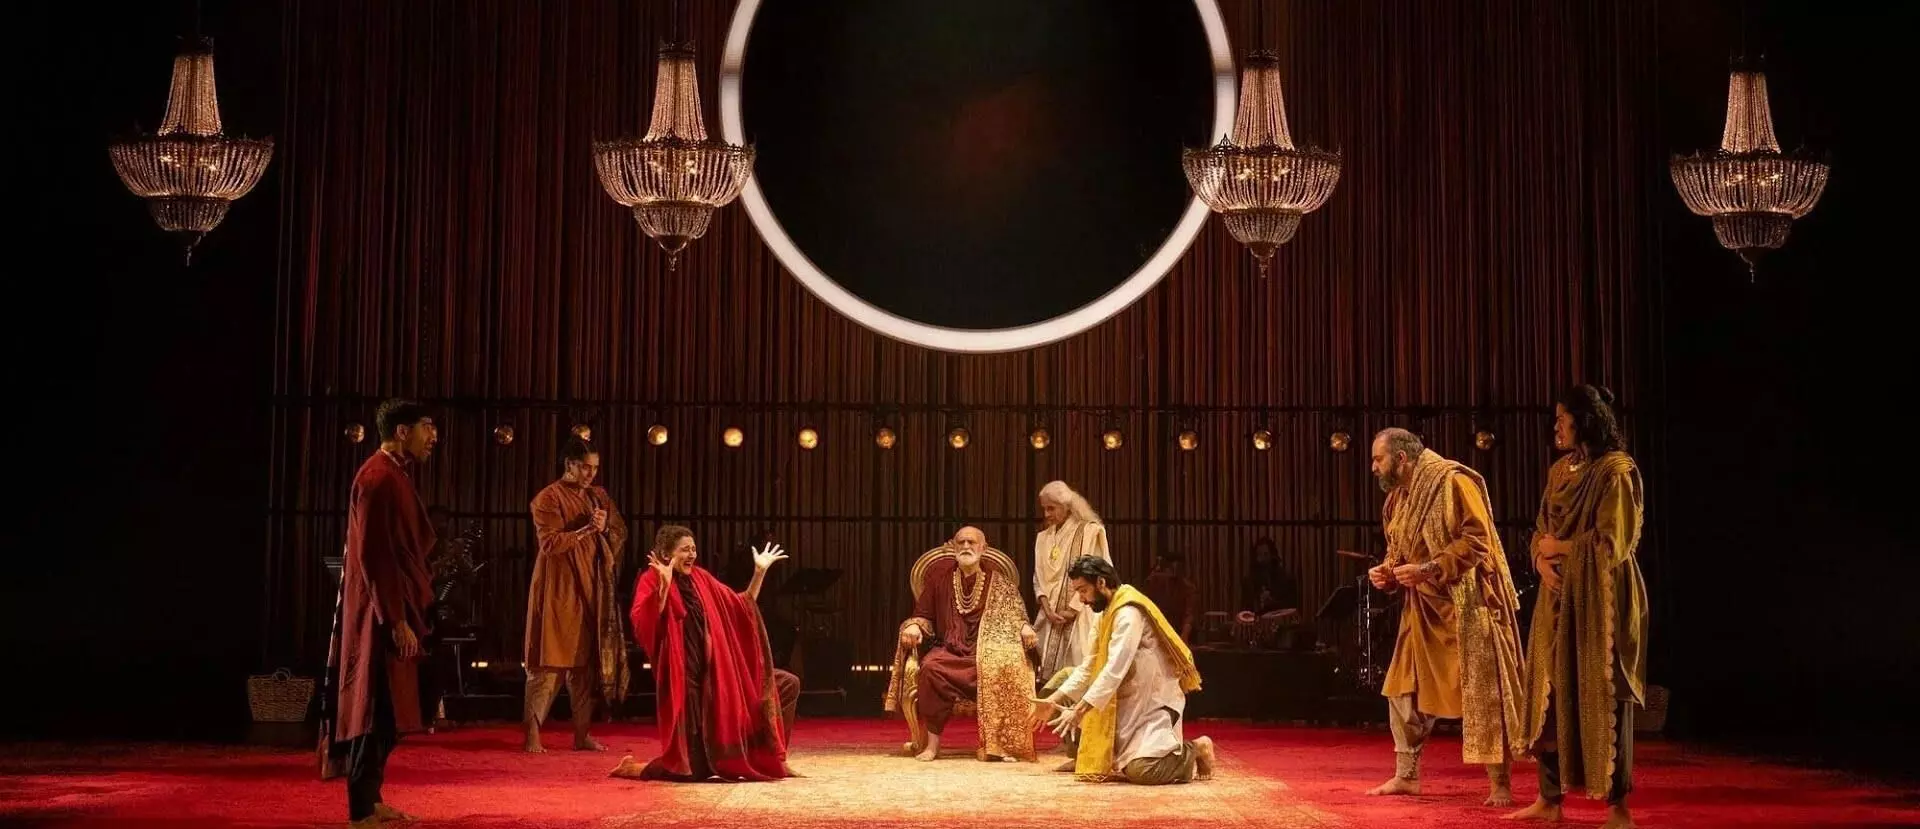 Premiere of contemporary retelling of ‘Mahabharata’ on London stage